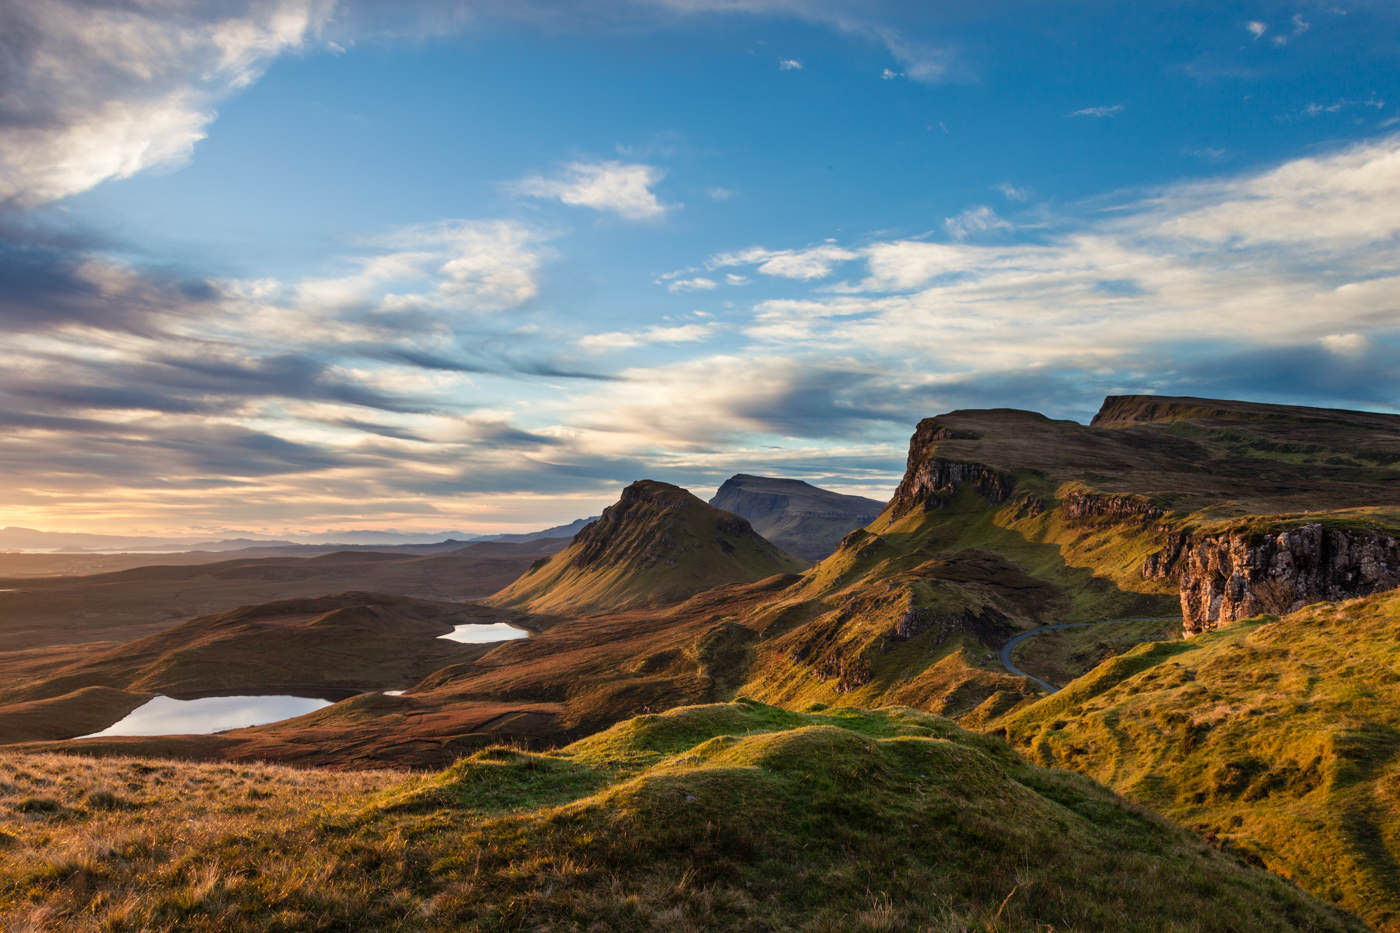 Quiraing landscape on the isle of Skye in Scotland